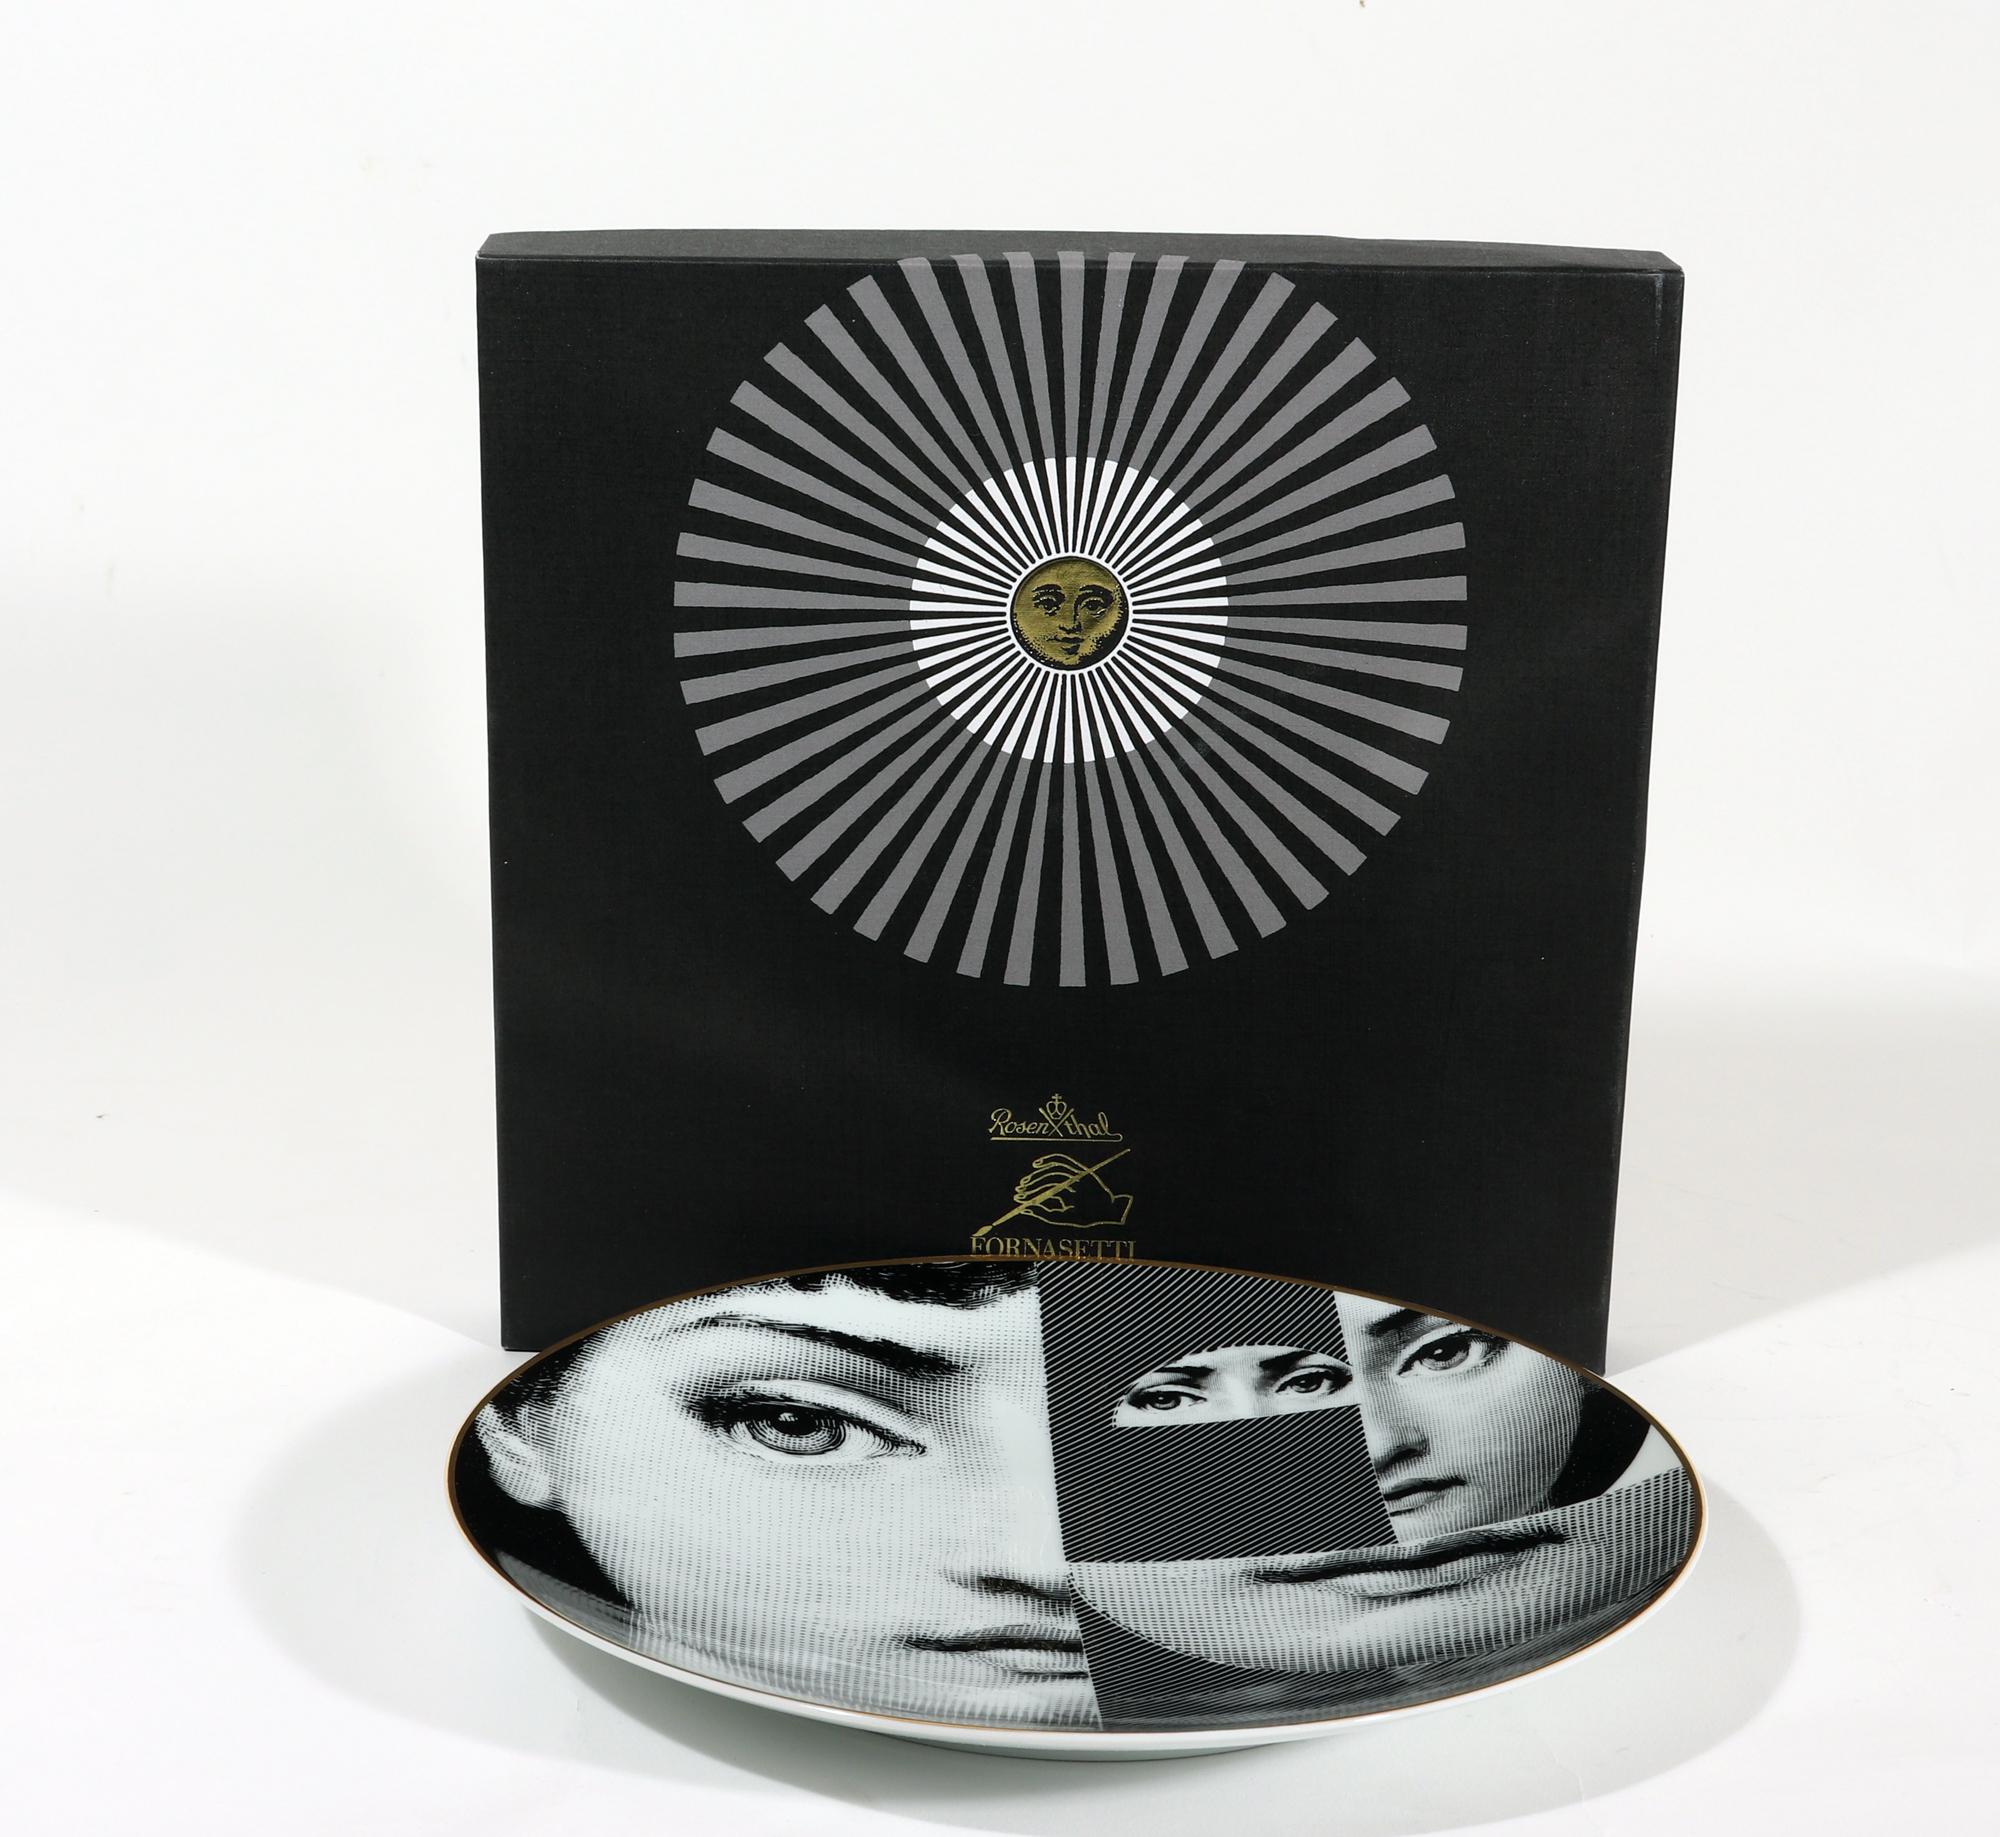 Piero Fornasetti Rosenthal Porcelain Themes & Variations Plate, Motiv 27,
With Original Box,
1980s

The Piero Fornasetti Themes & Variation design is made on Rosenthal porcelain. The pattern, Motiv 27, is rare in that it is rarely seen. The